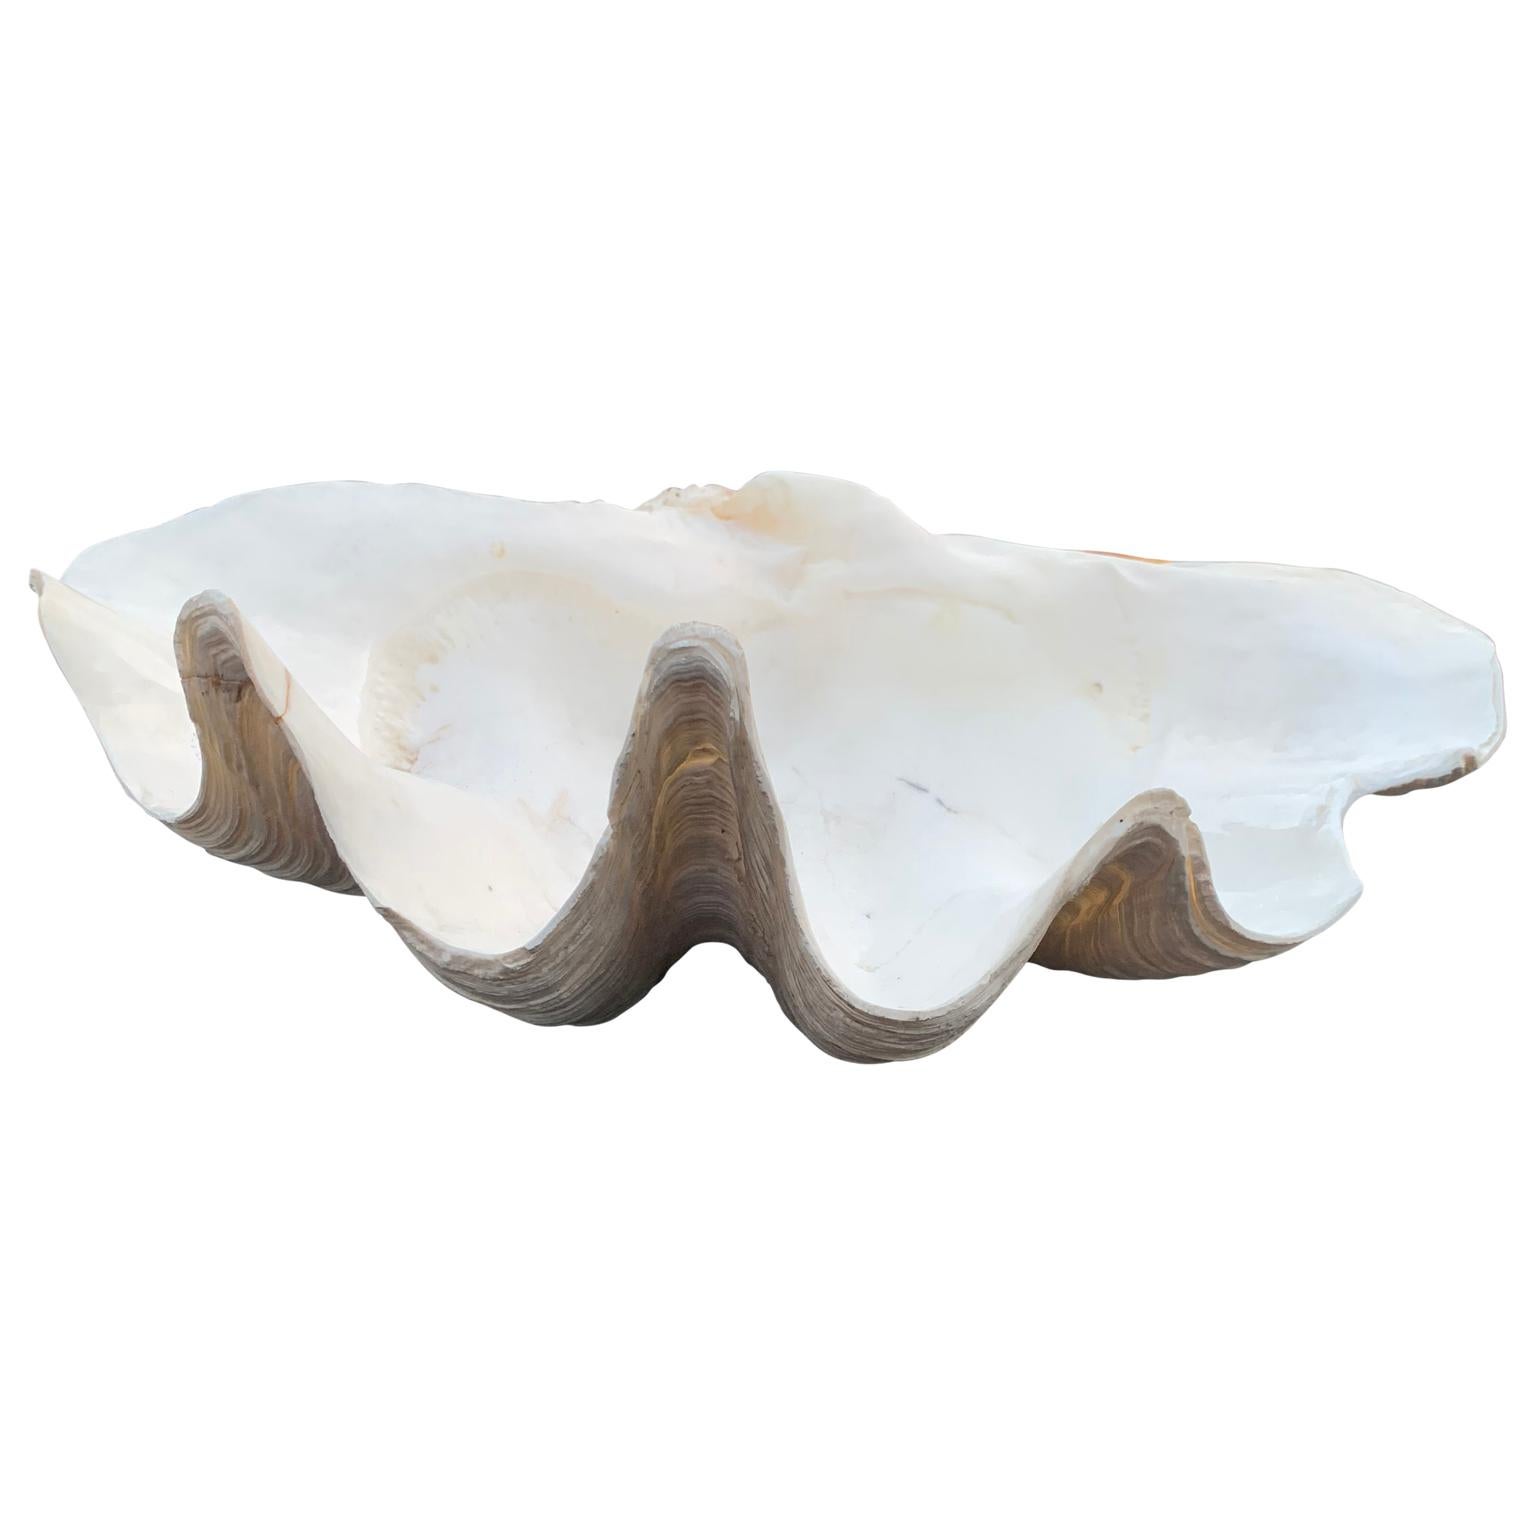 Medium size giant south pacific Tridacna Gigas clam shell.